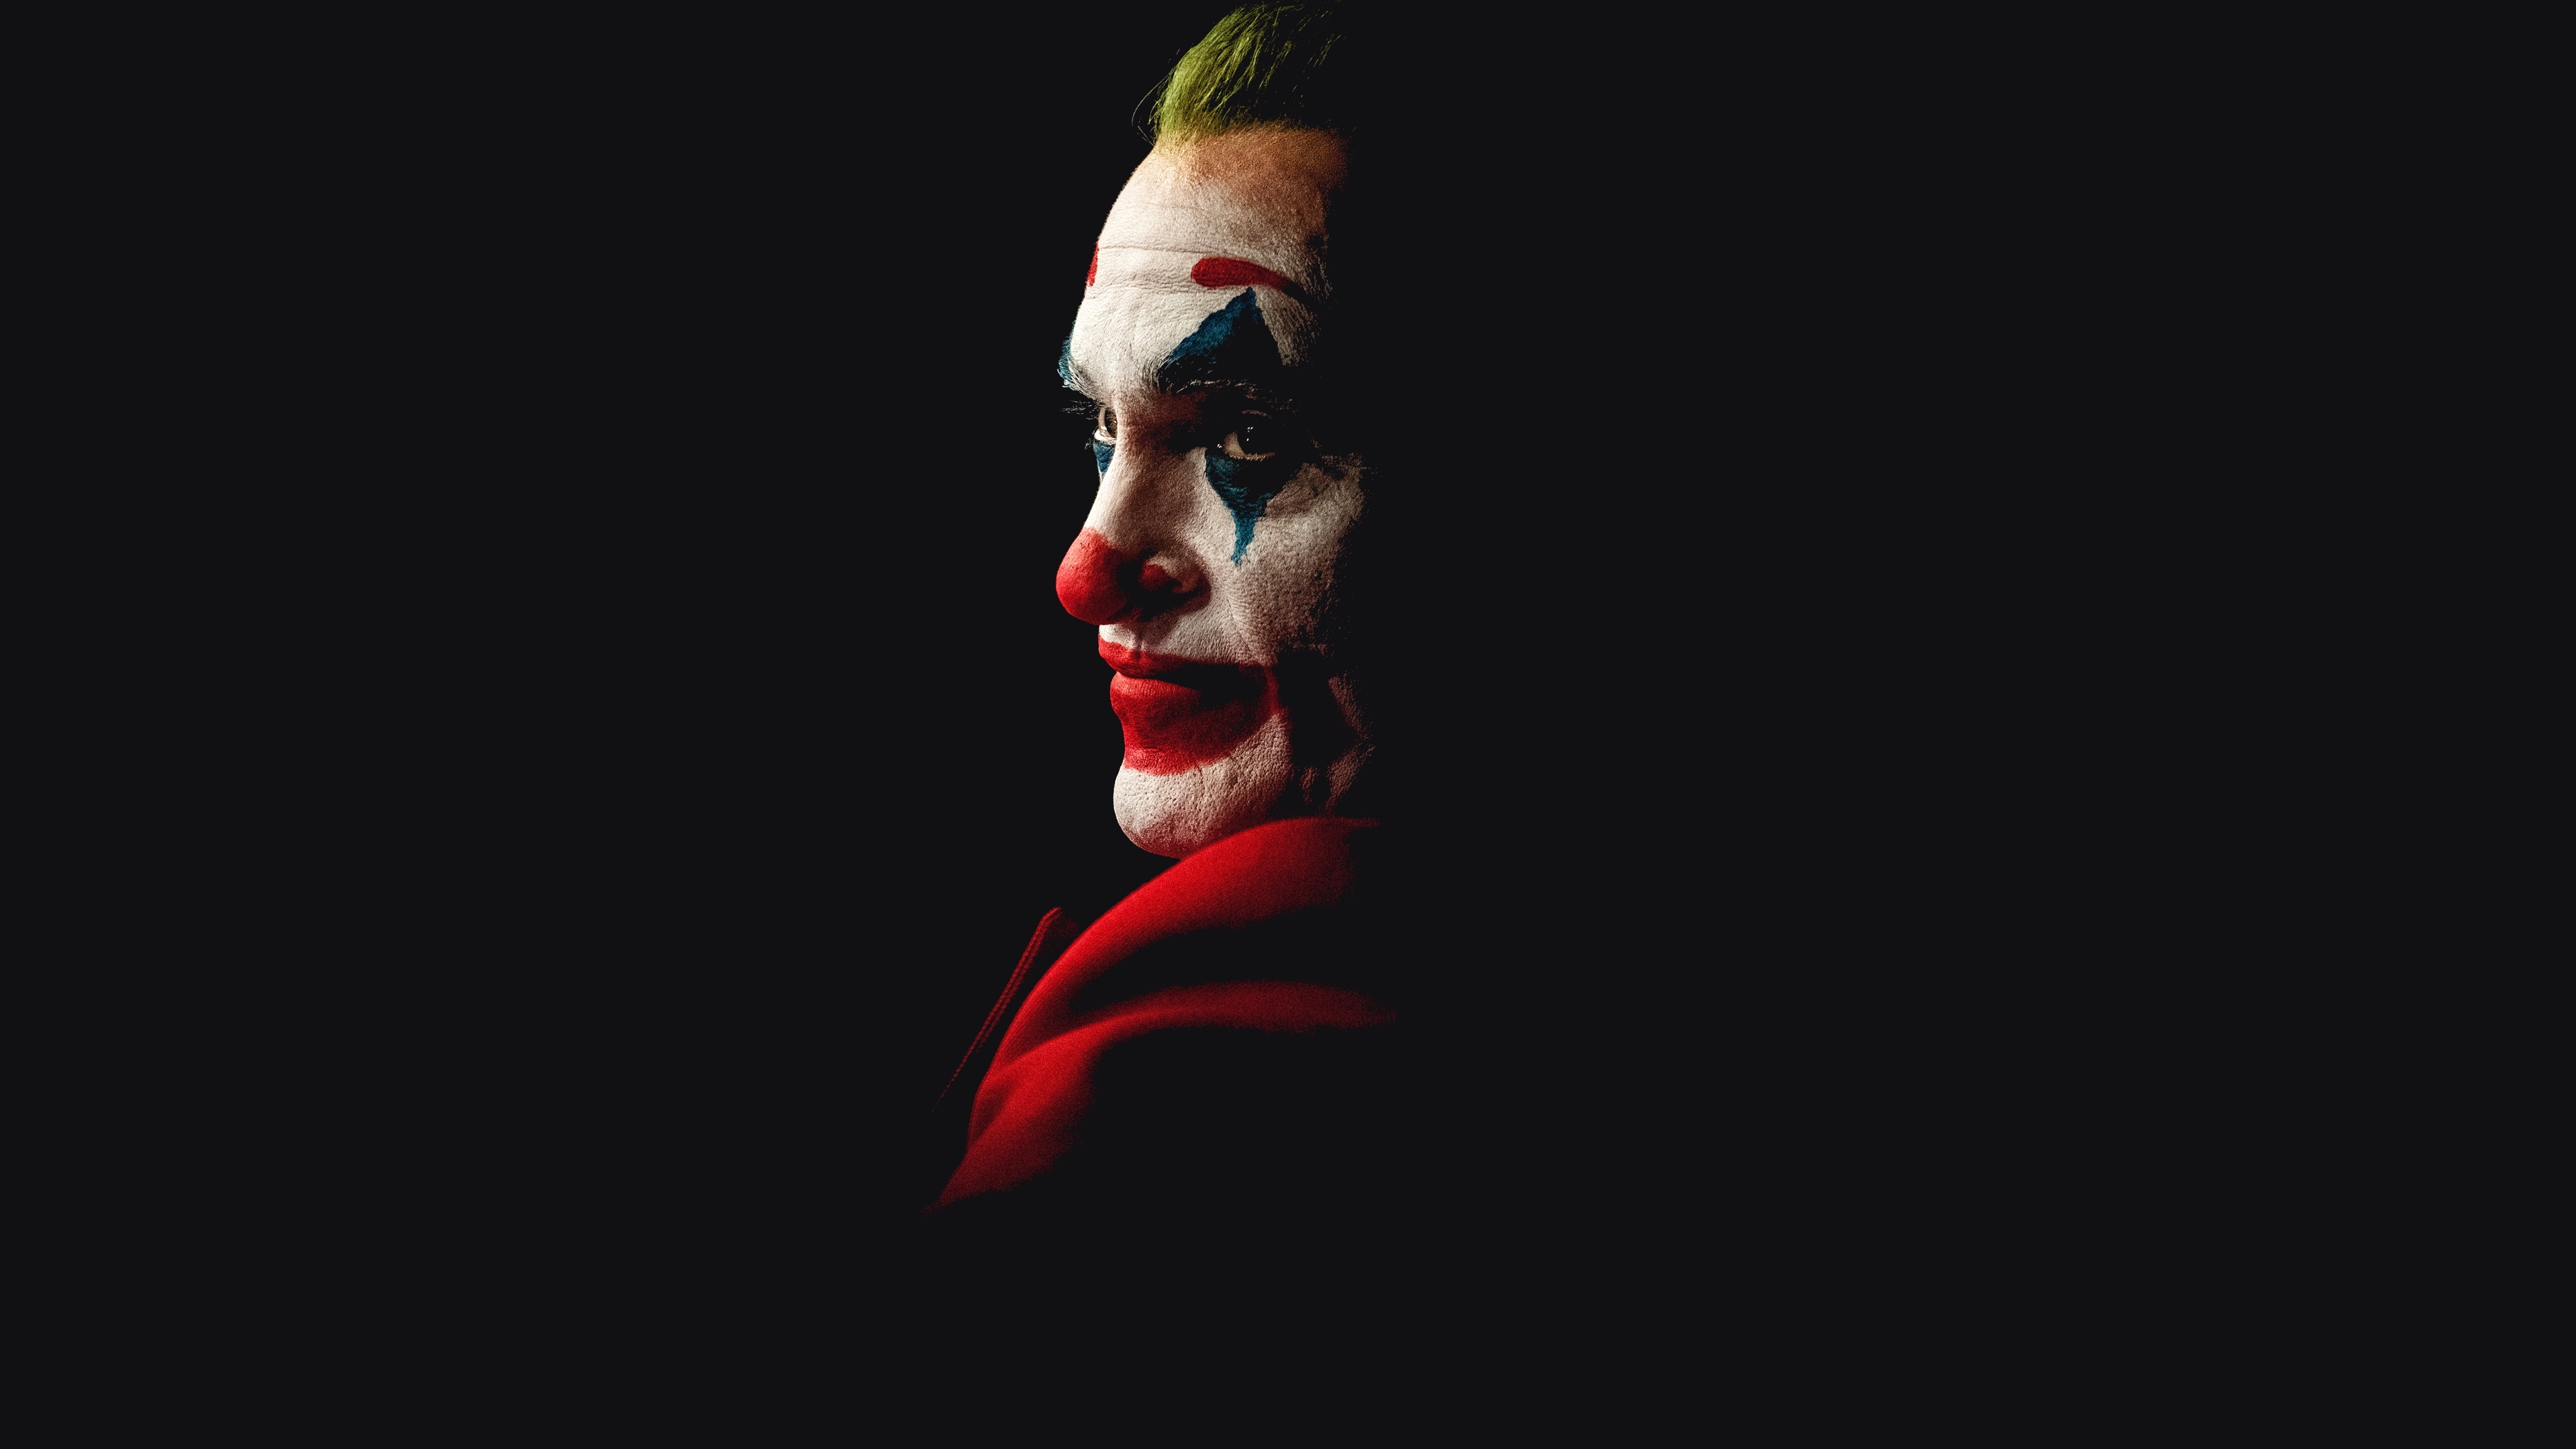 Joker 4K wallpapers for your desktop or mobile screen free and easy to